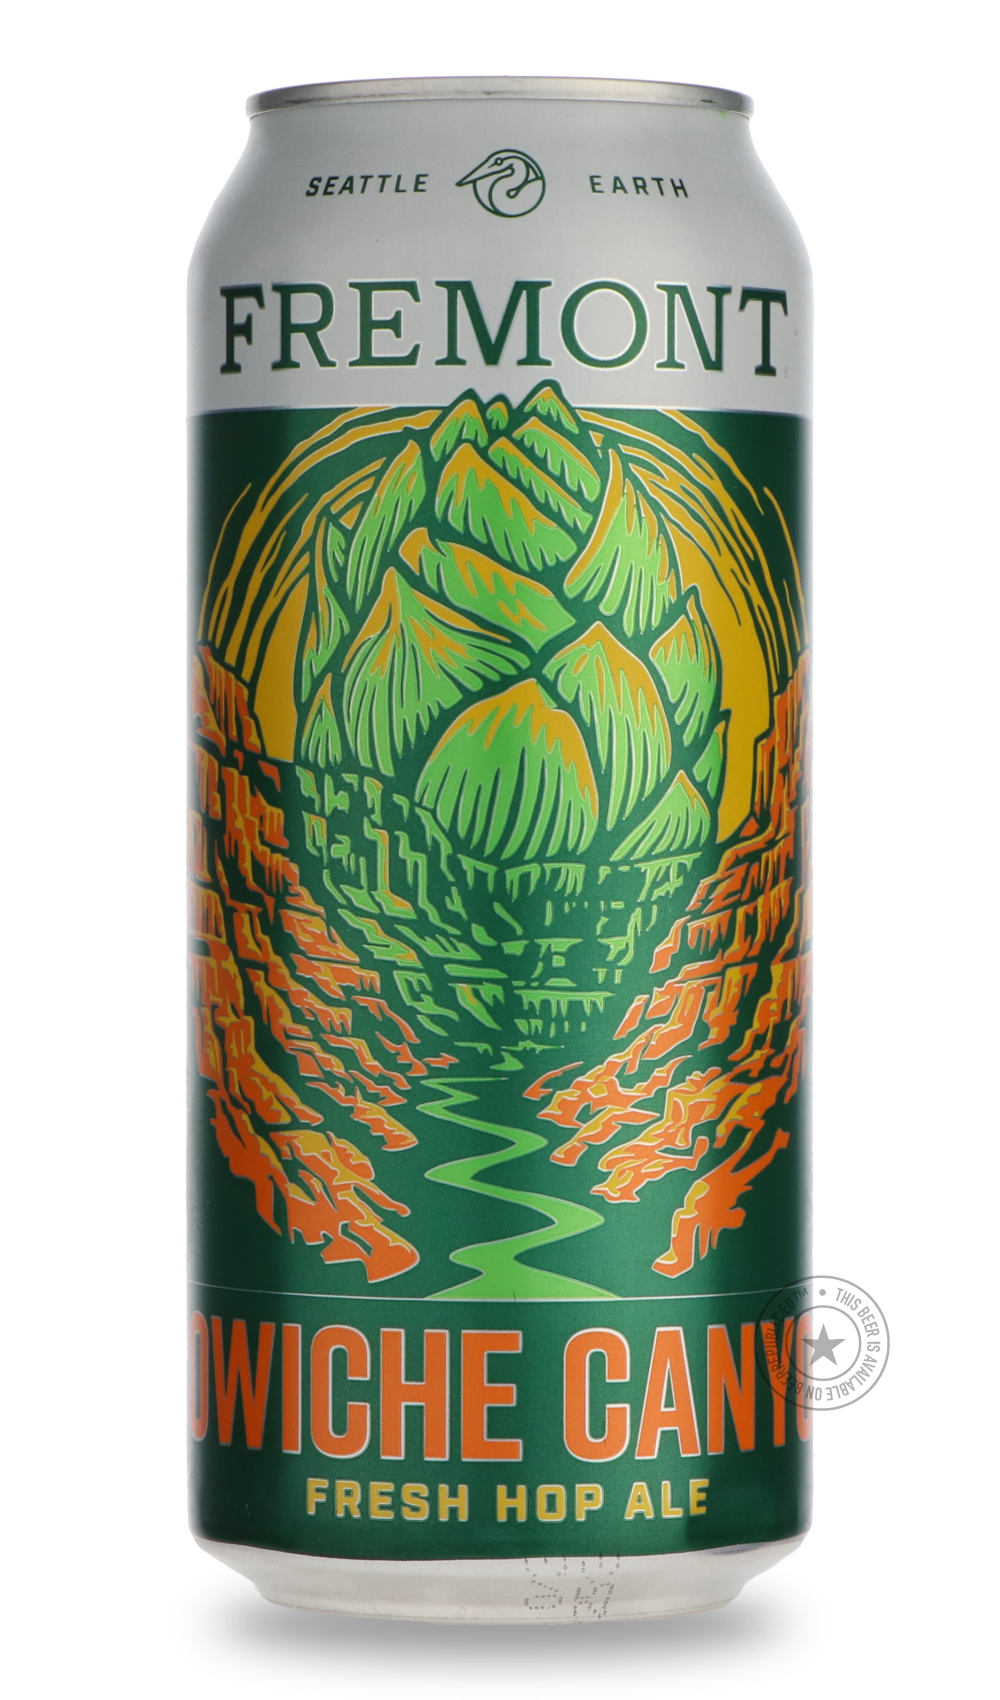 -Fremont- Cowiche Canyon – Fresh Hop Ale (2022)-Pale- Only @ Beer Republic - The best online beer store for American & Canadian craft beer - Buy beer online from the USA and Canada - Bier online kopen - Amerikaans bier kopen - Craft beer store - Craft beer kopen - Amerikanisch bier kaufen - Bier online kaufen - Acheter biere online - IPA - Stout - Porter - New England IPA - Hazy IPA - Imperial Stout - Barrel Aged - Barrel Aged Imperial Stout - Brown - Dark beer - Blond - Blonde - Pilsner - Lager - Wheat - W